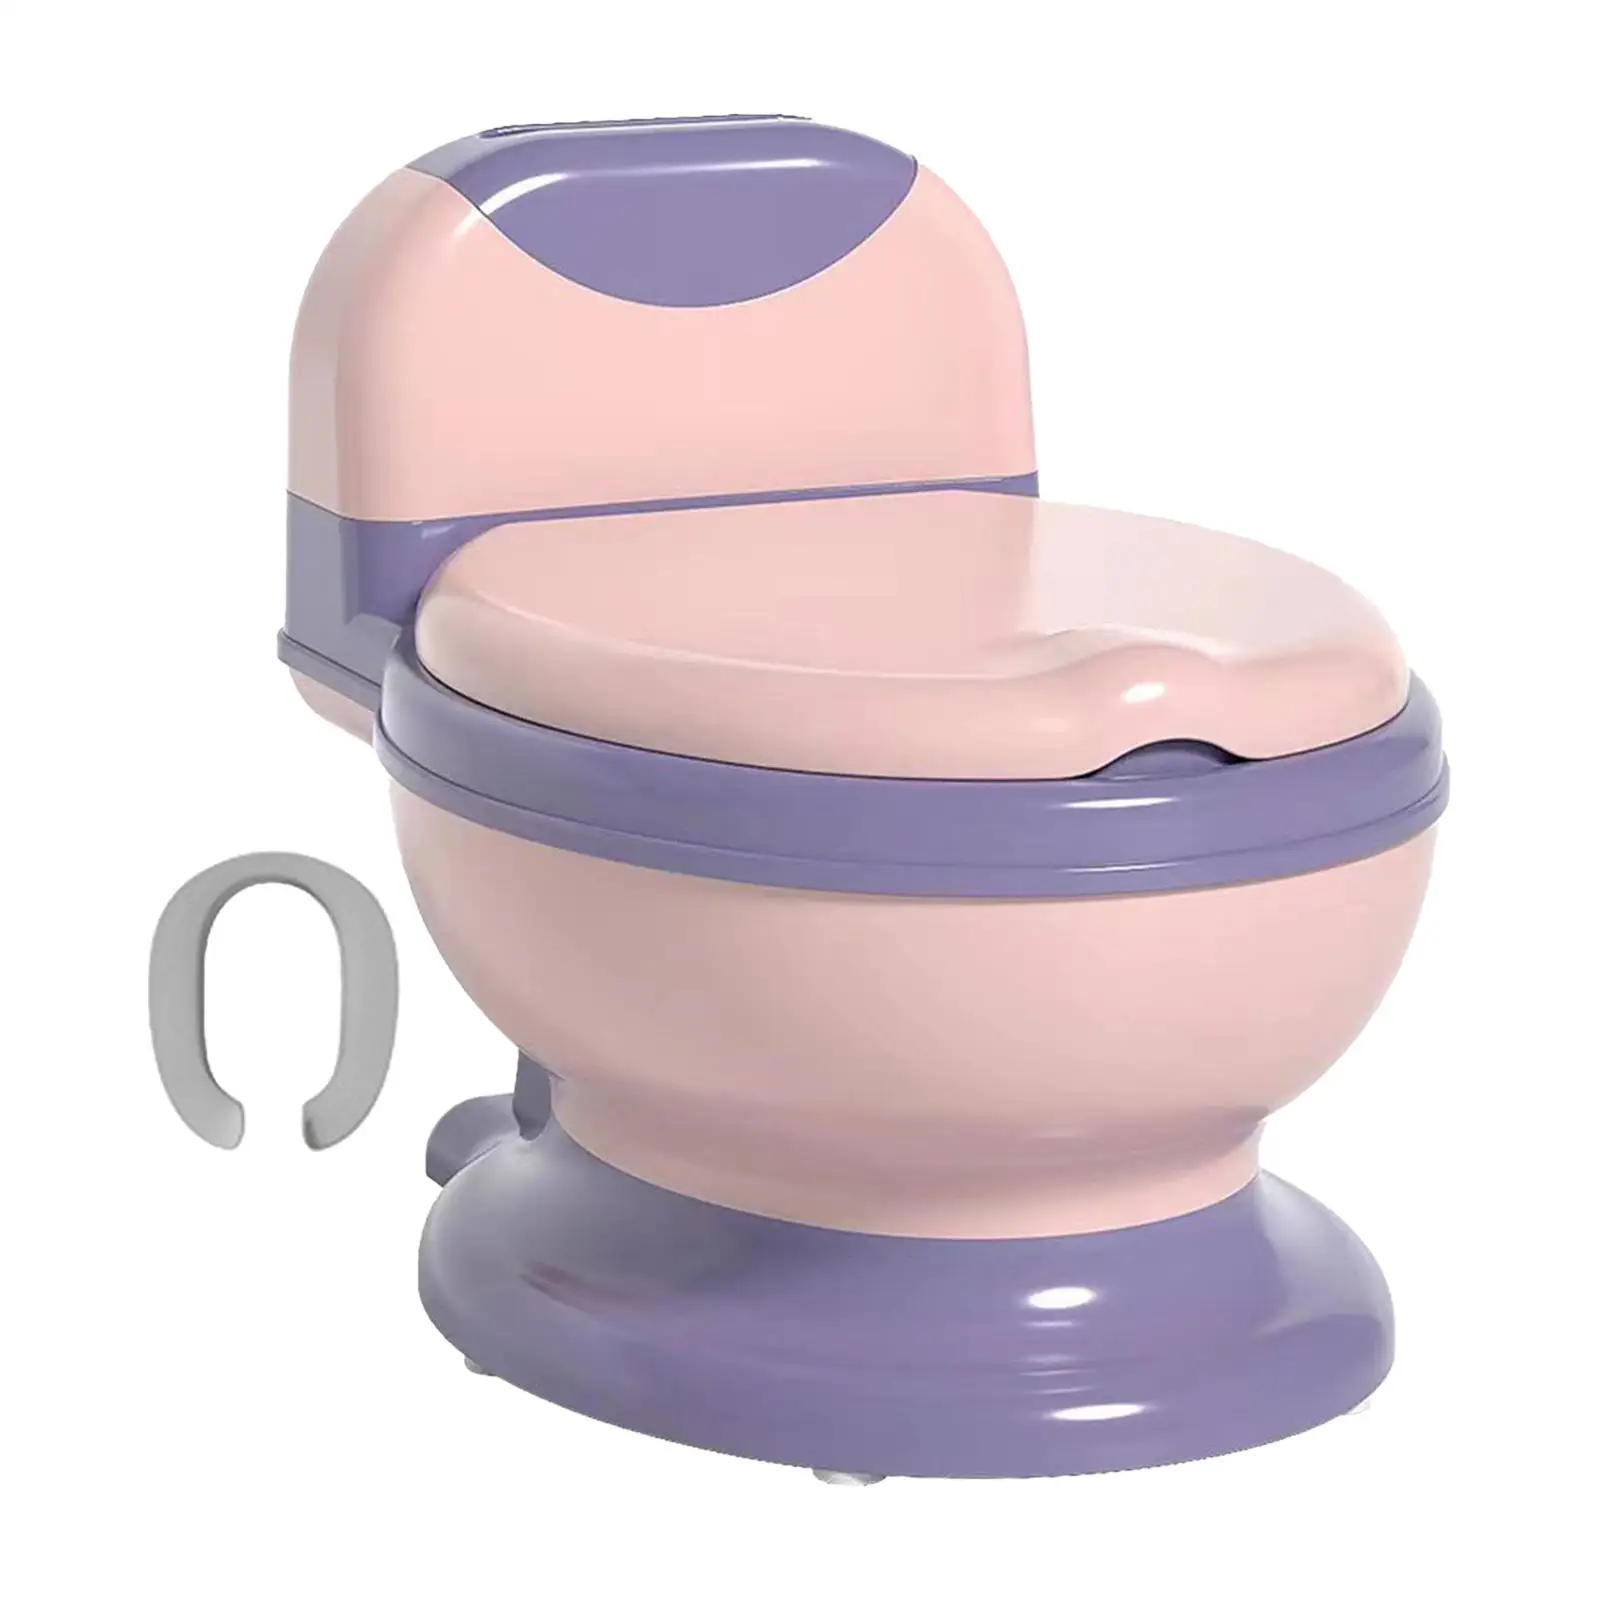 Potty Train Toilet Toilet Training Seat Potty Seat Toddlers Potty Chair Realistic Toilet for Boys Baby Kids Toddlers Children